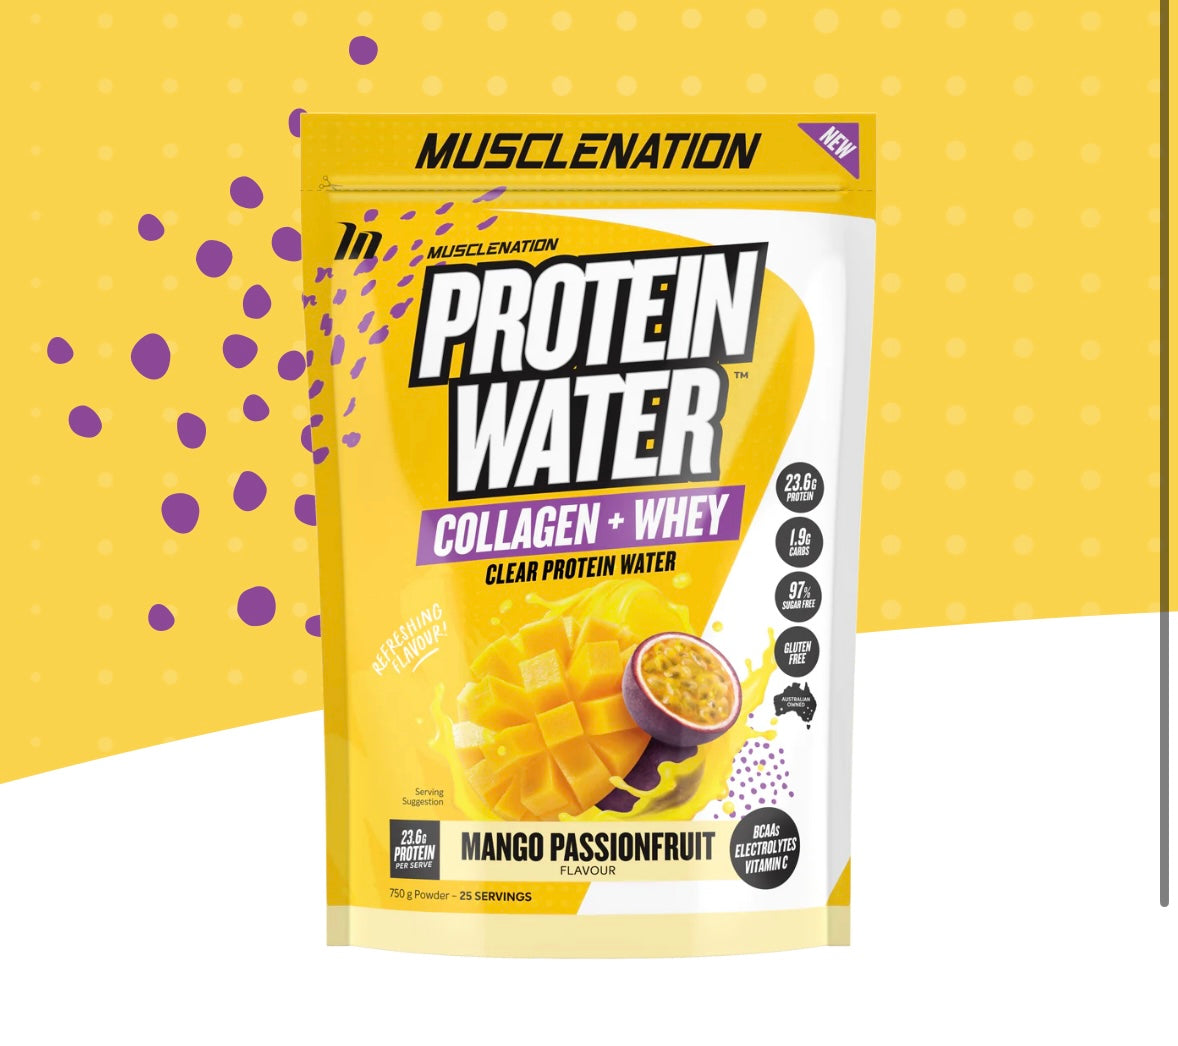 MUSCLE NATION PROTEIN WATER MANGO PASSIONFRUIT